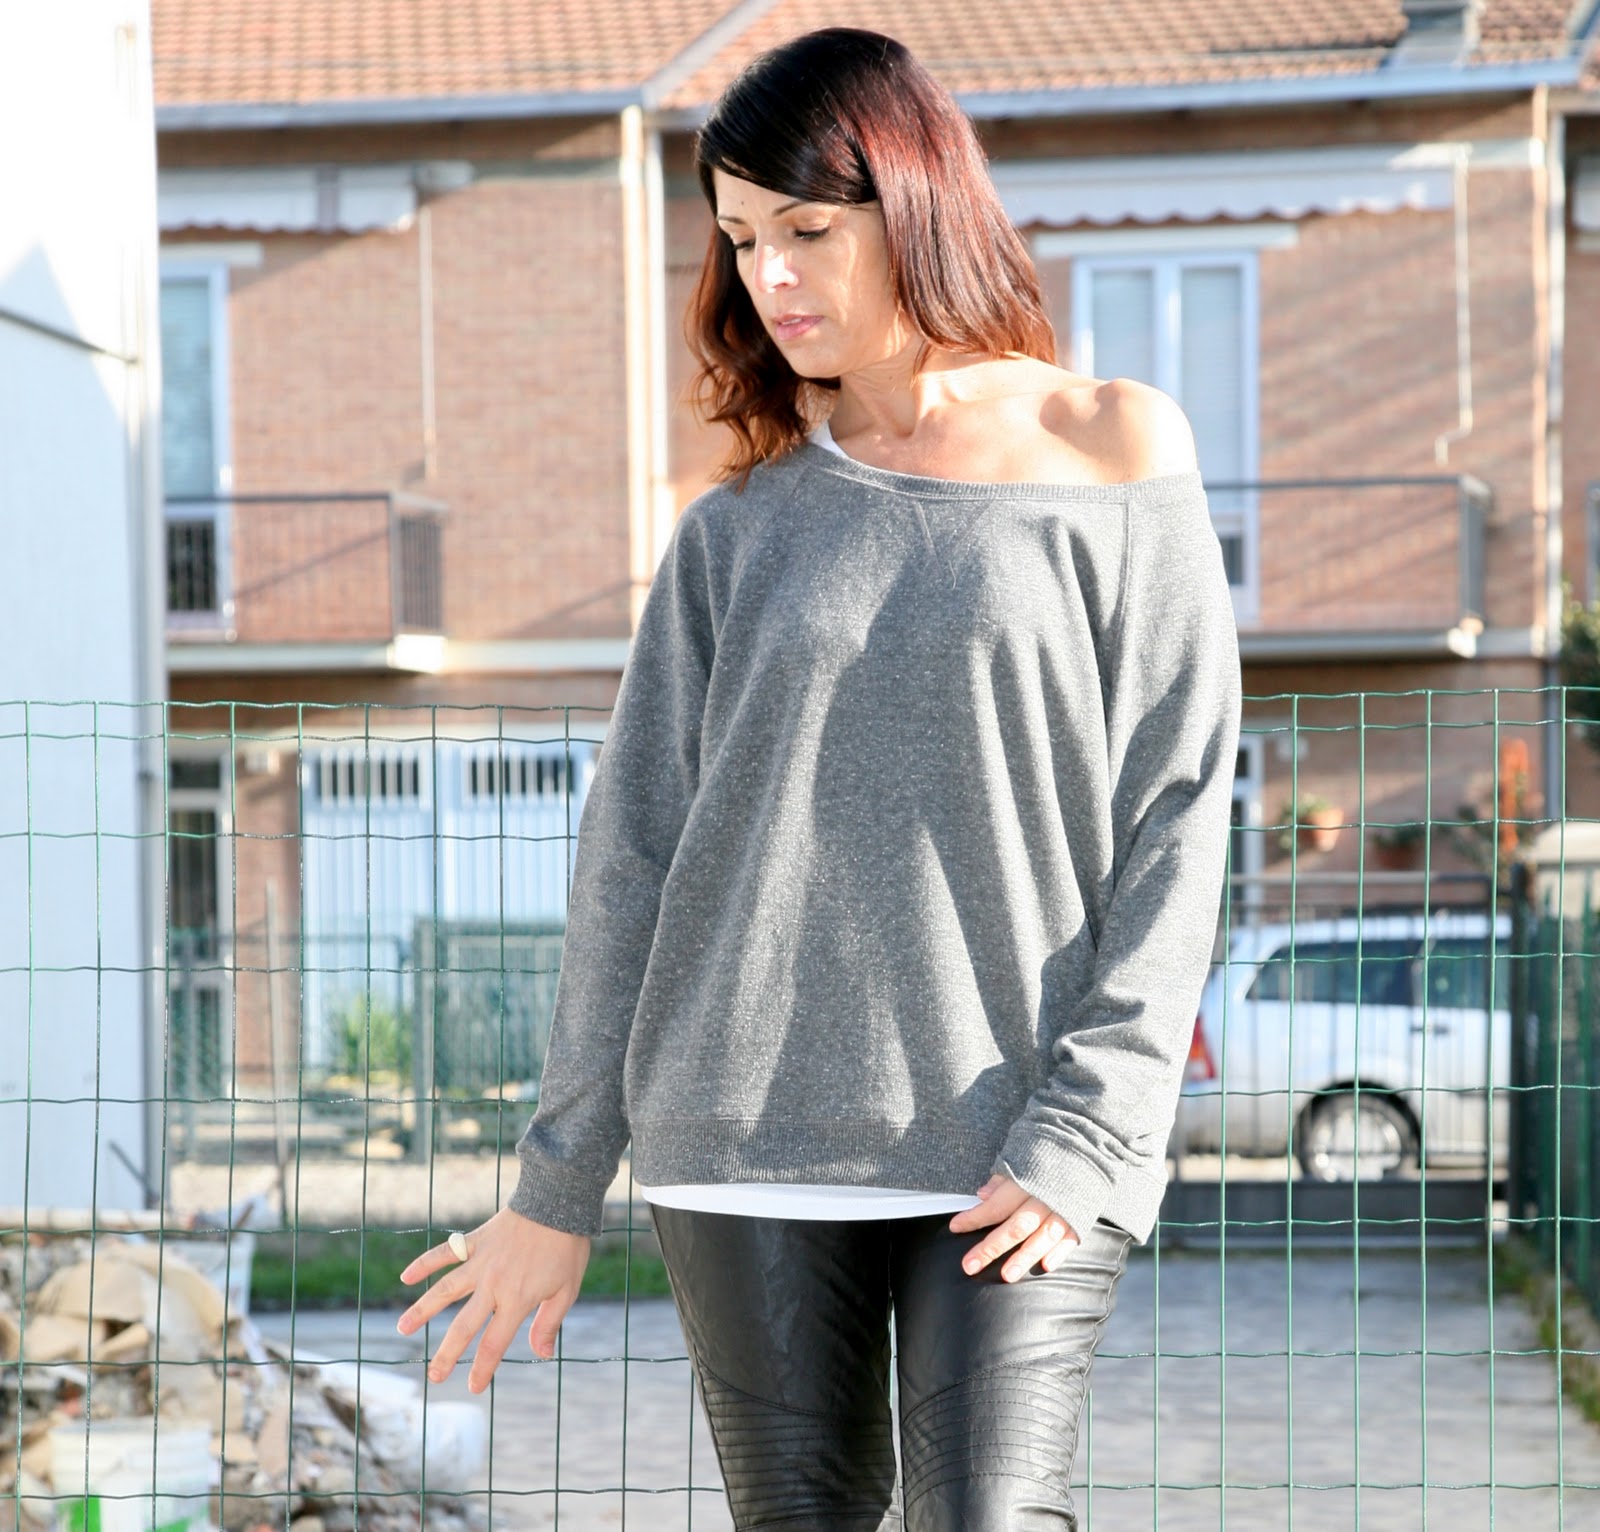 ChiccaStyle: Biker Leather Pants And Oversized Sweater